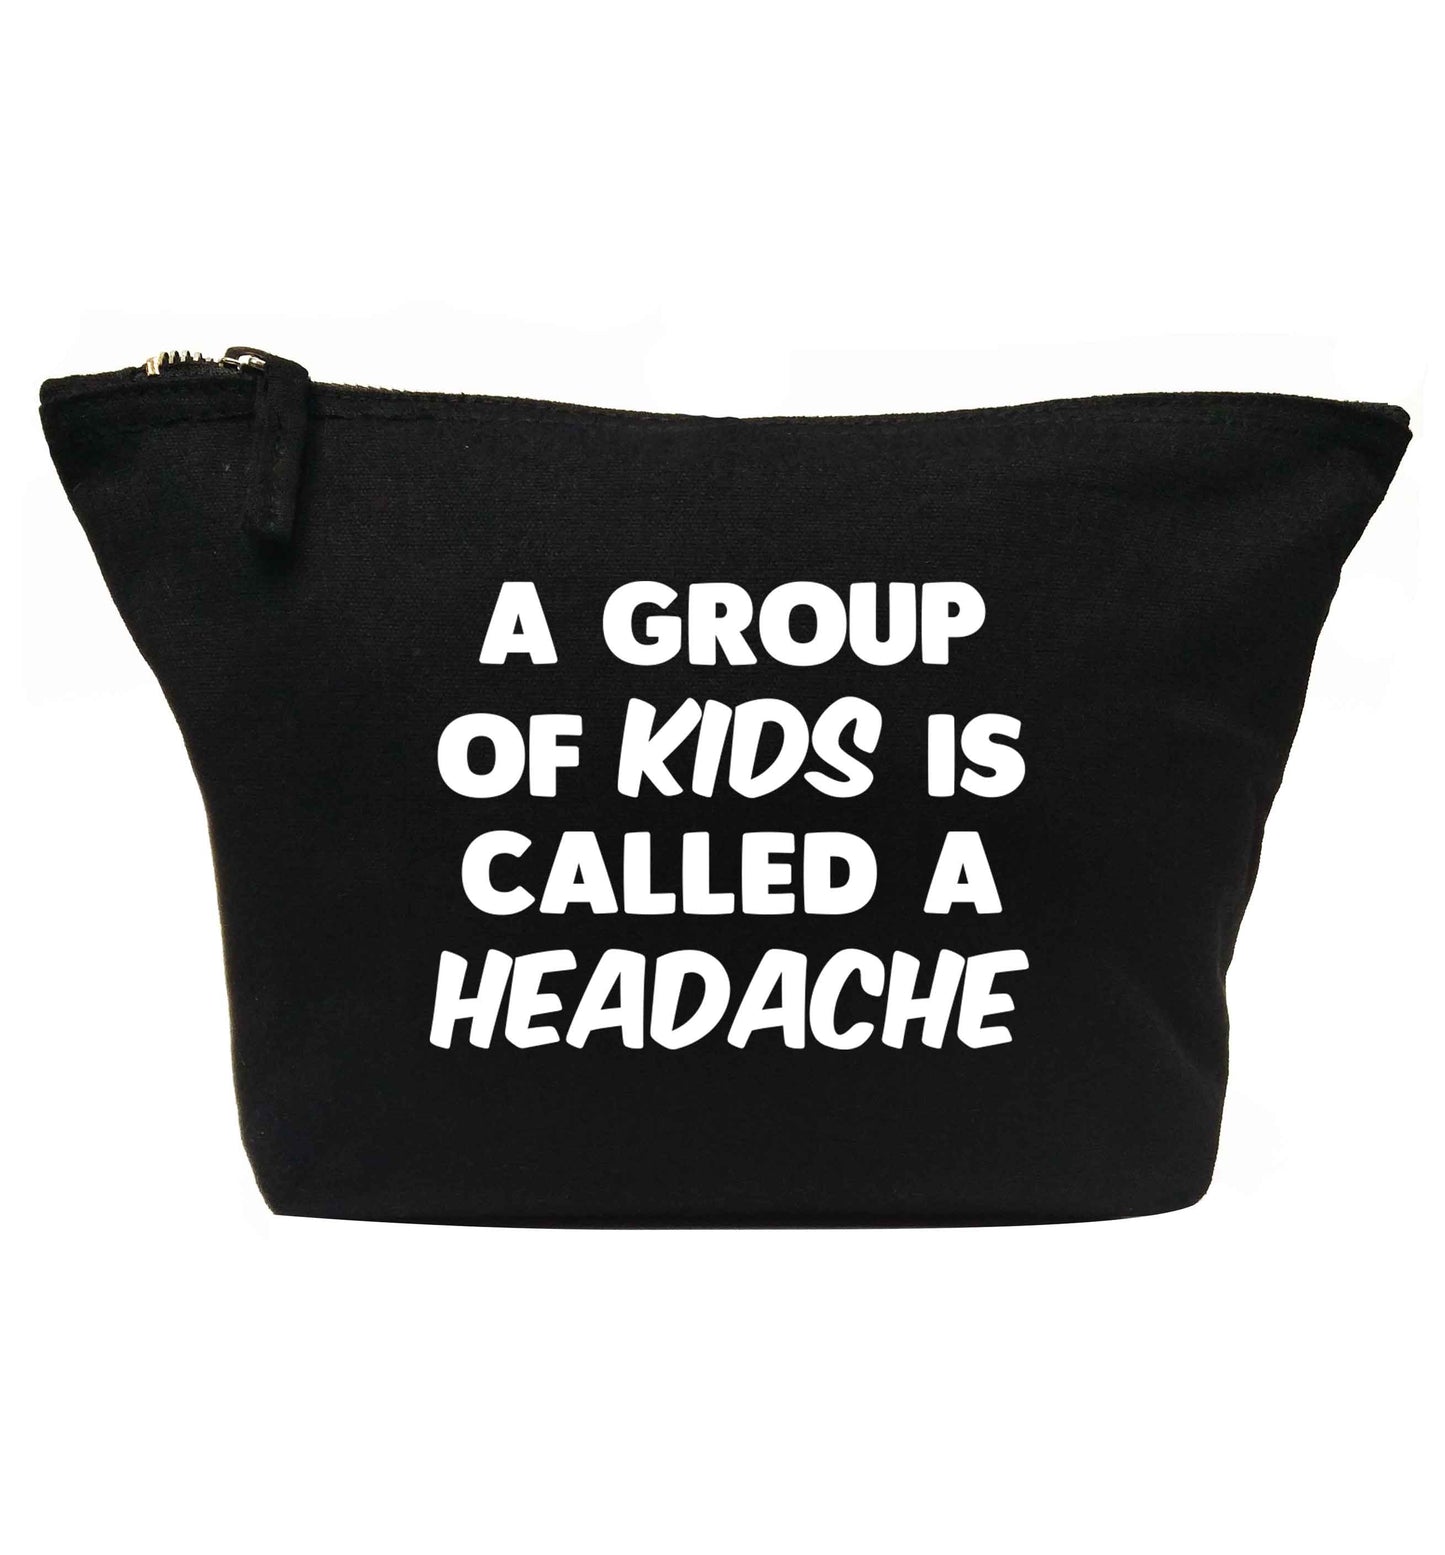 A group of kids is called a headache | makeup / wash bag